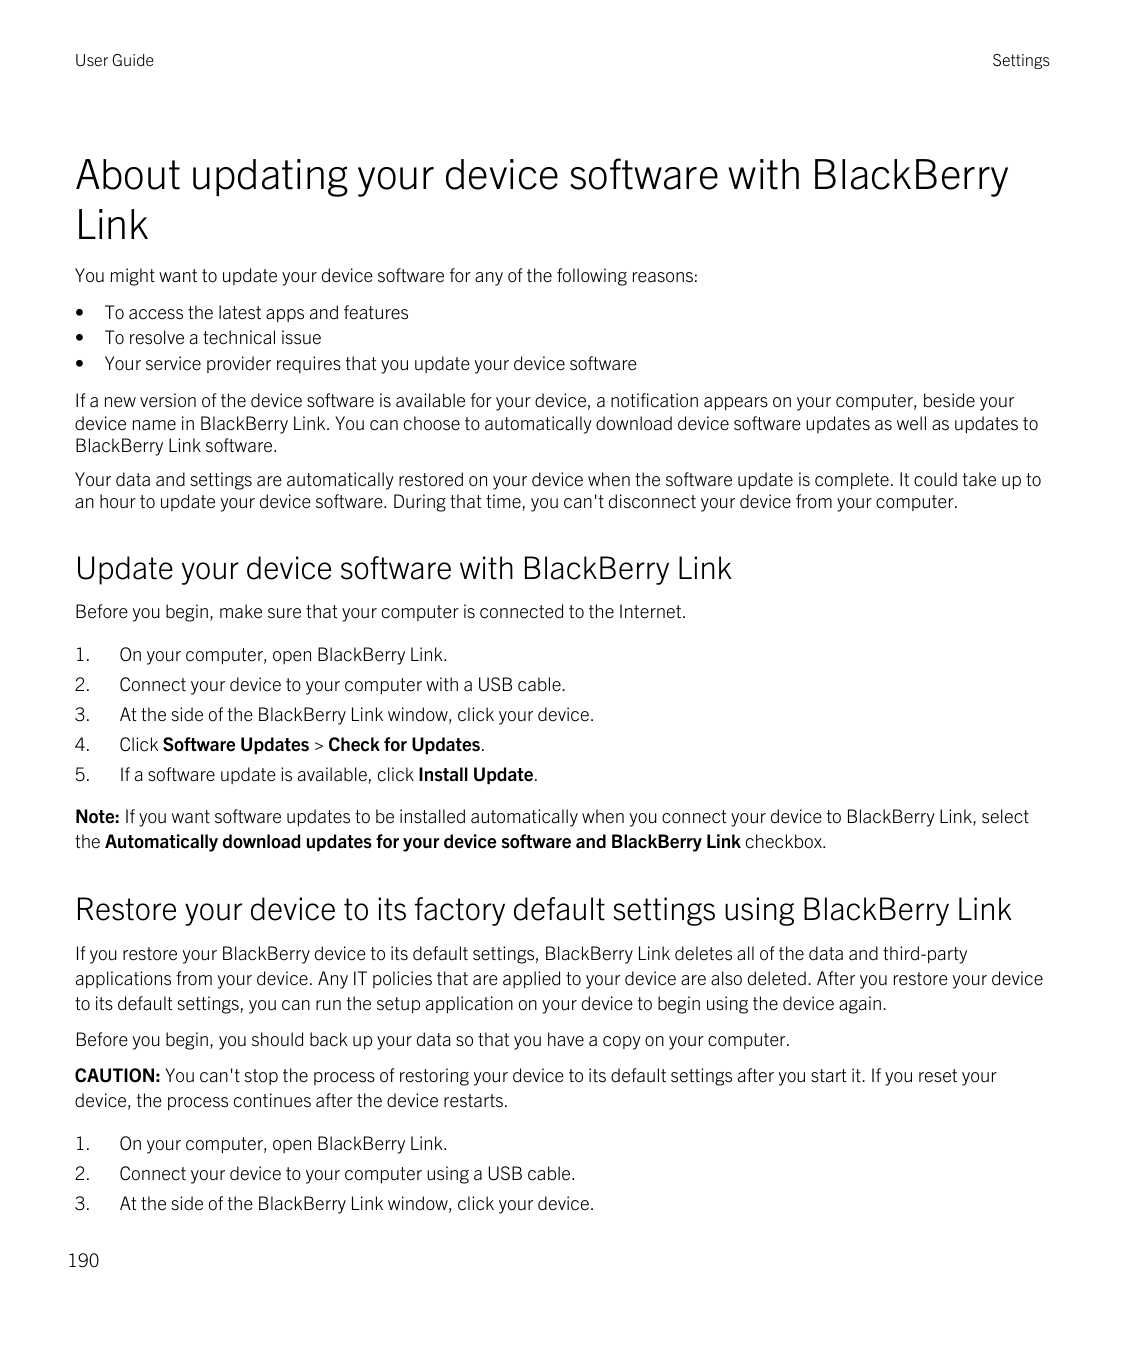 User GuideSettingsAbout updating your device software with BlackBerryLinkYou might want to update your device software for any o